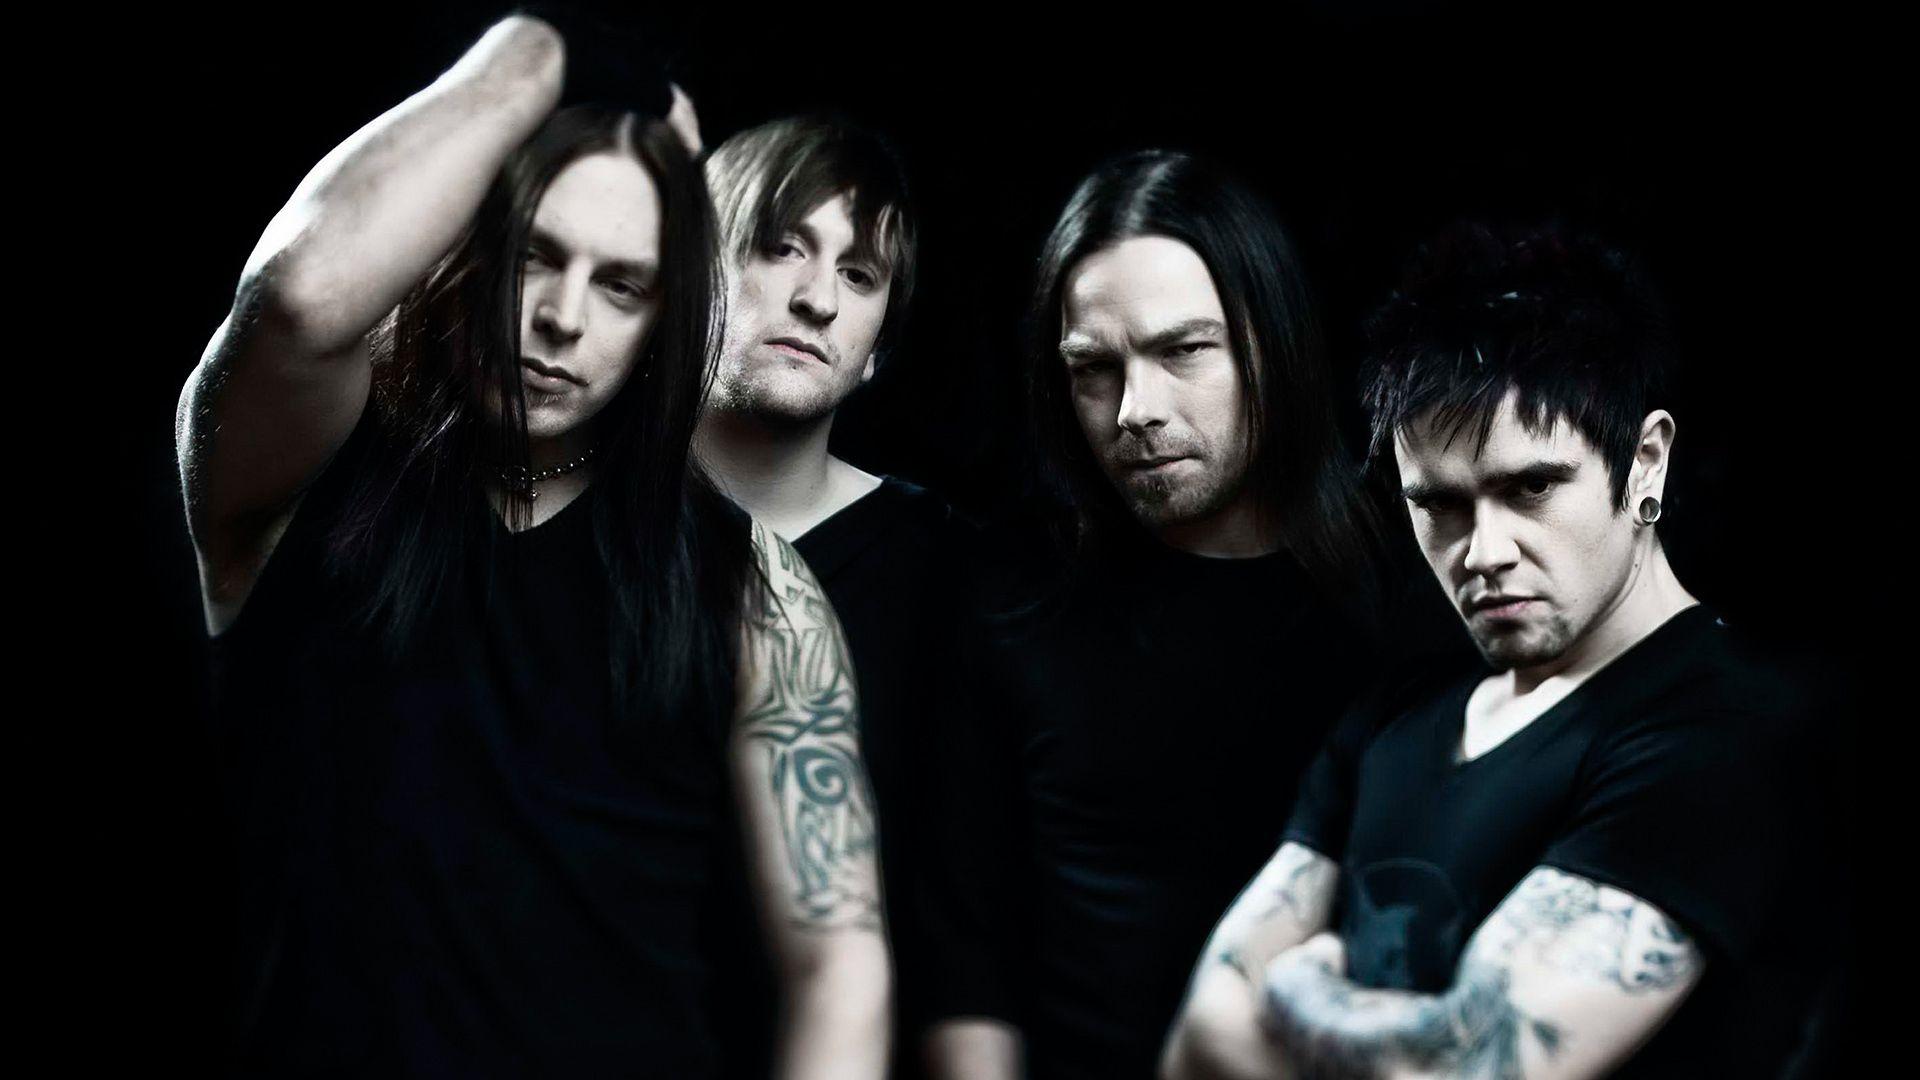 Download Wallpaper 1920x1080 bullet for my valentine, tattoo